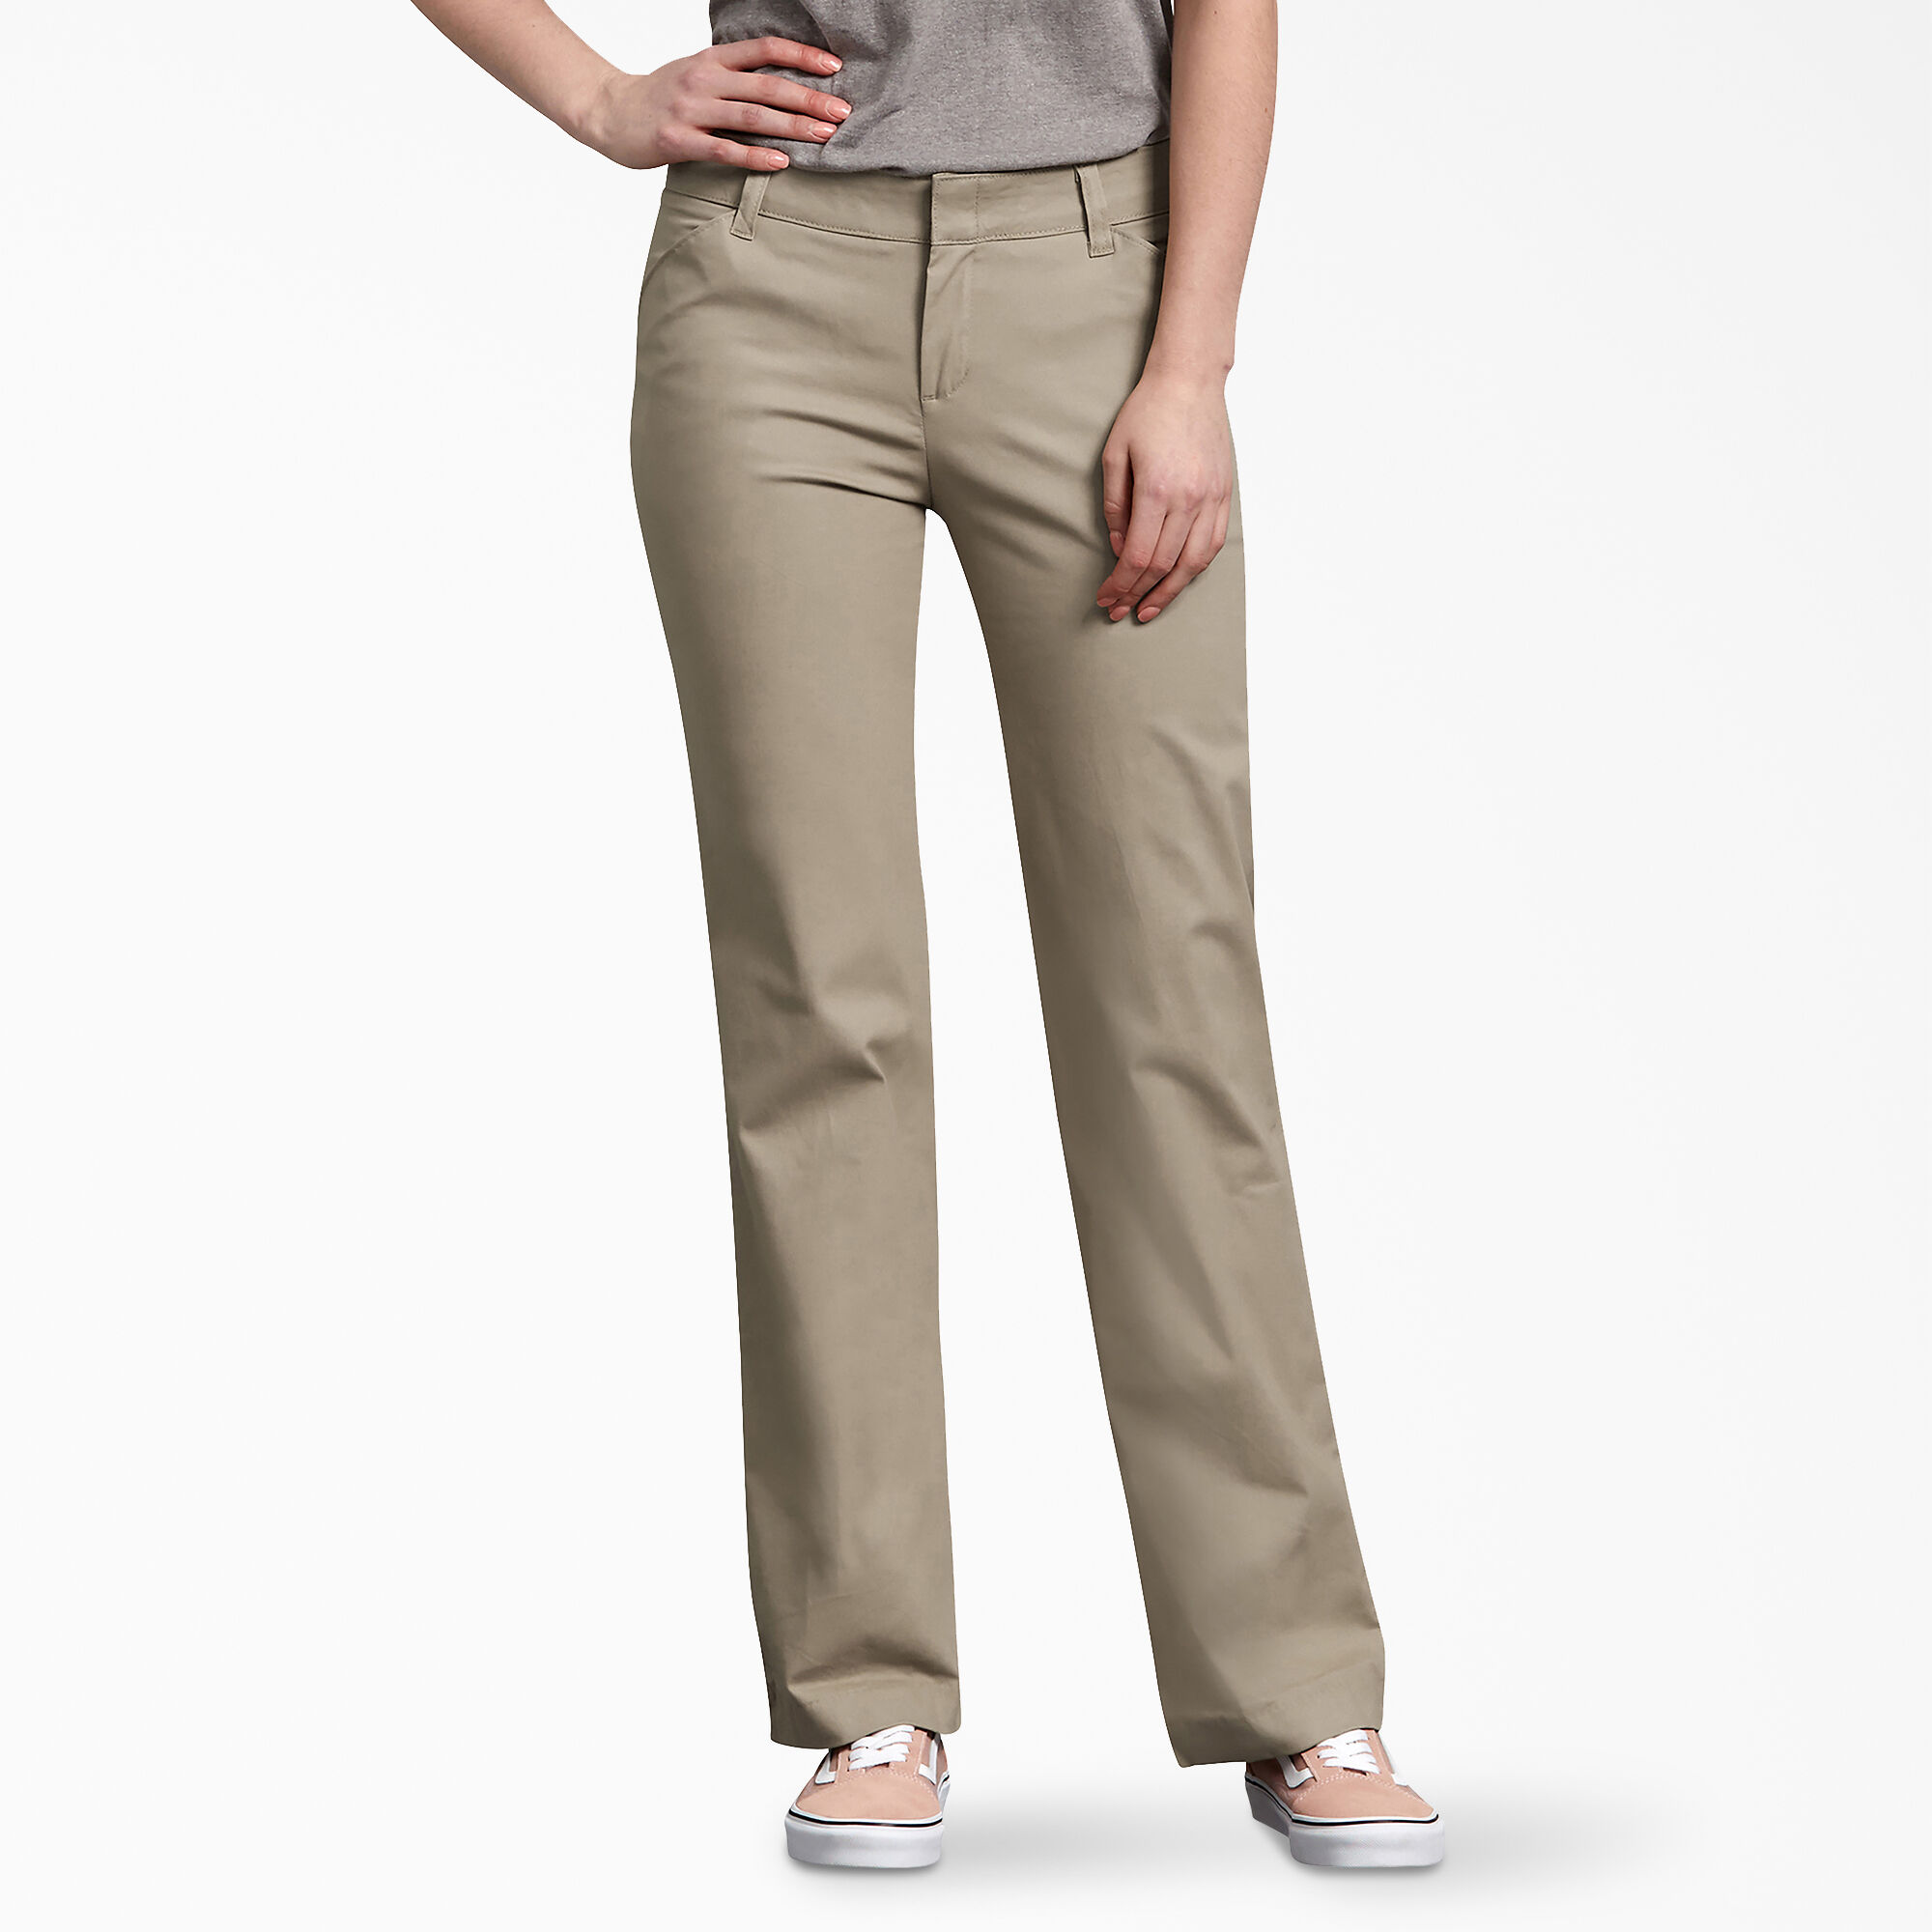 dickies women's relaxed fit cargo pants